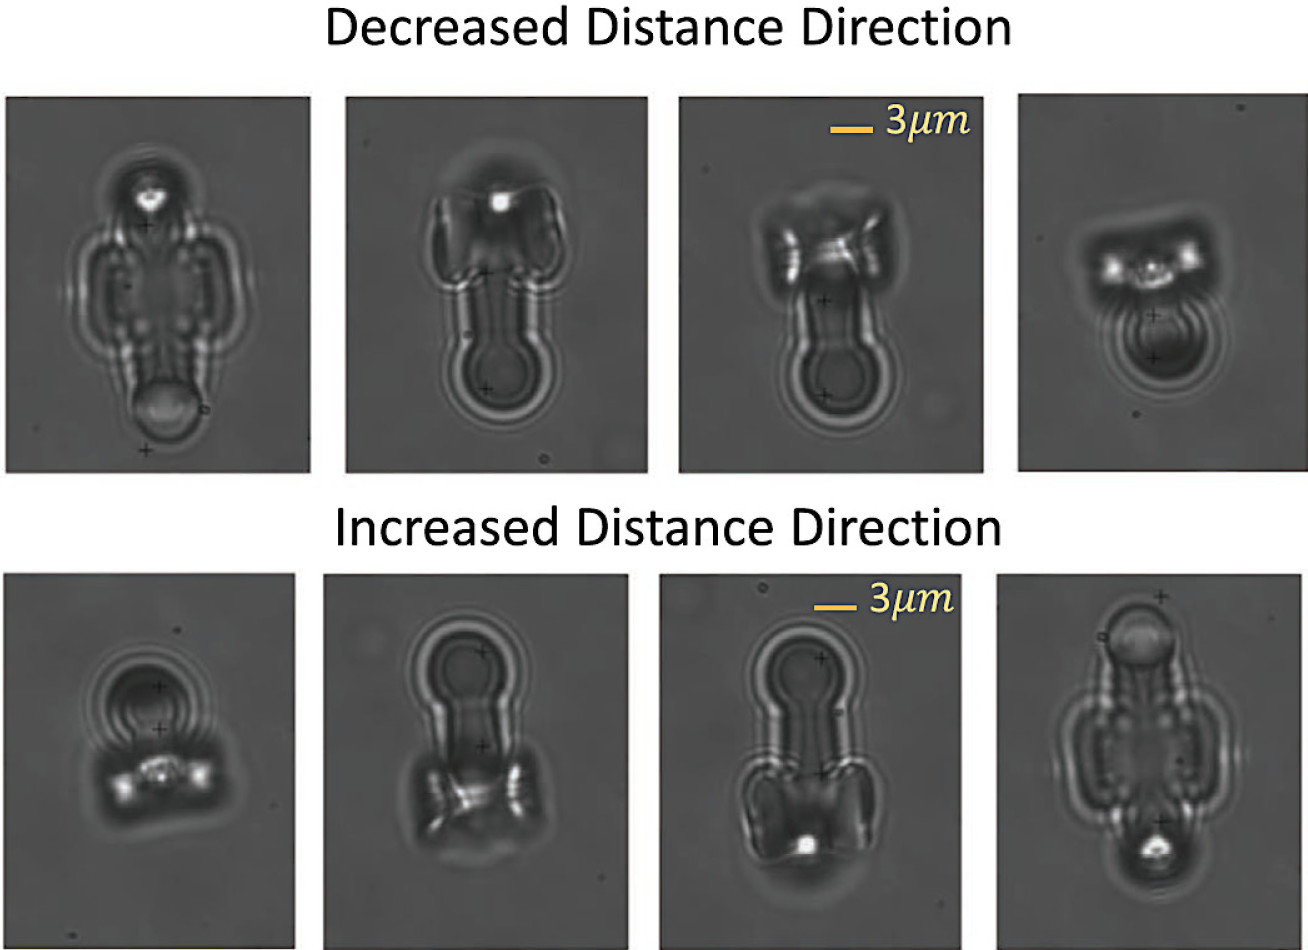 Distributed force control of the microrobot with two additional holders and the evaluation of indirect manipulation.